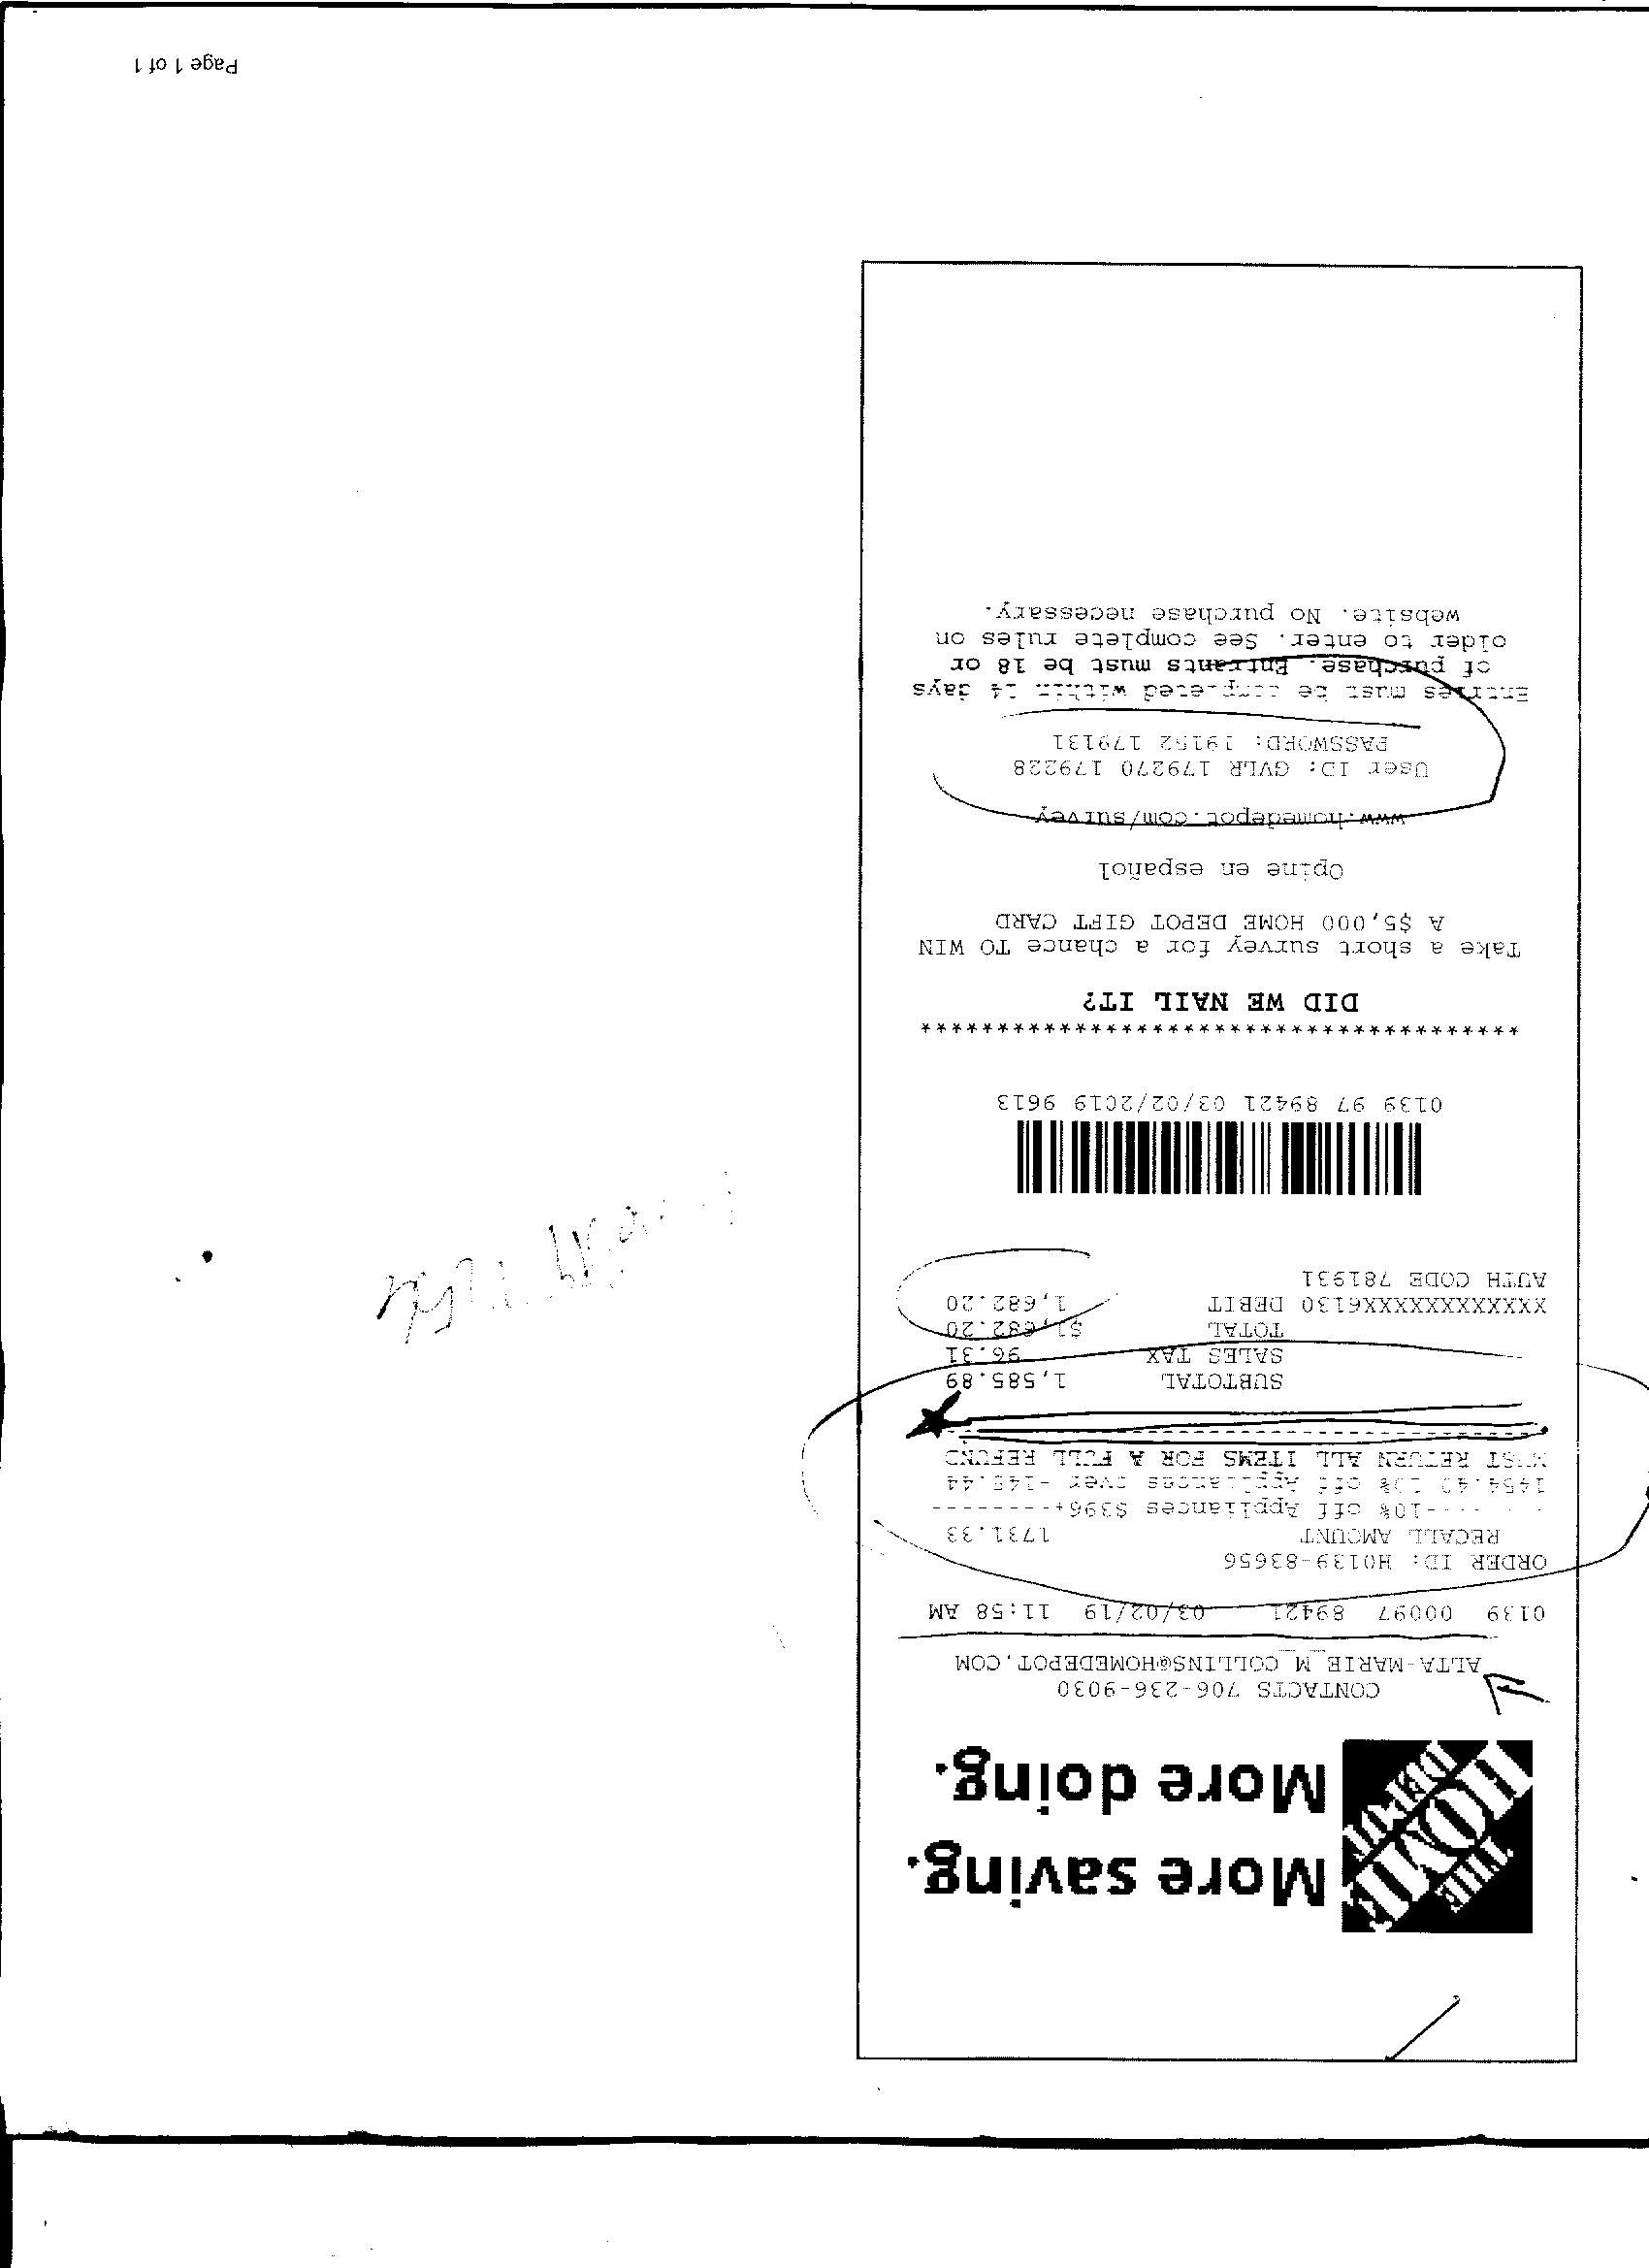 Home Depot Corporate Complaints - Number 20  HissingKitty.com Intended For Home Depot Receipt Template